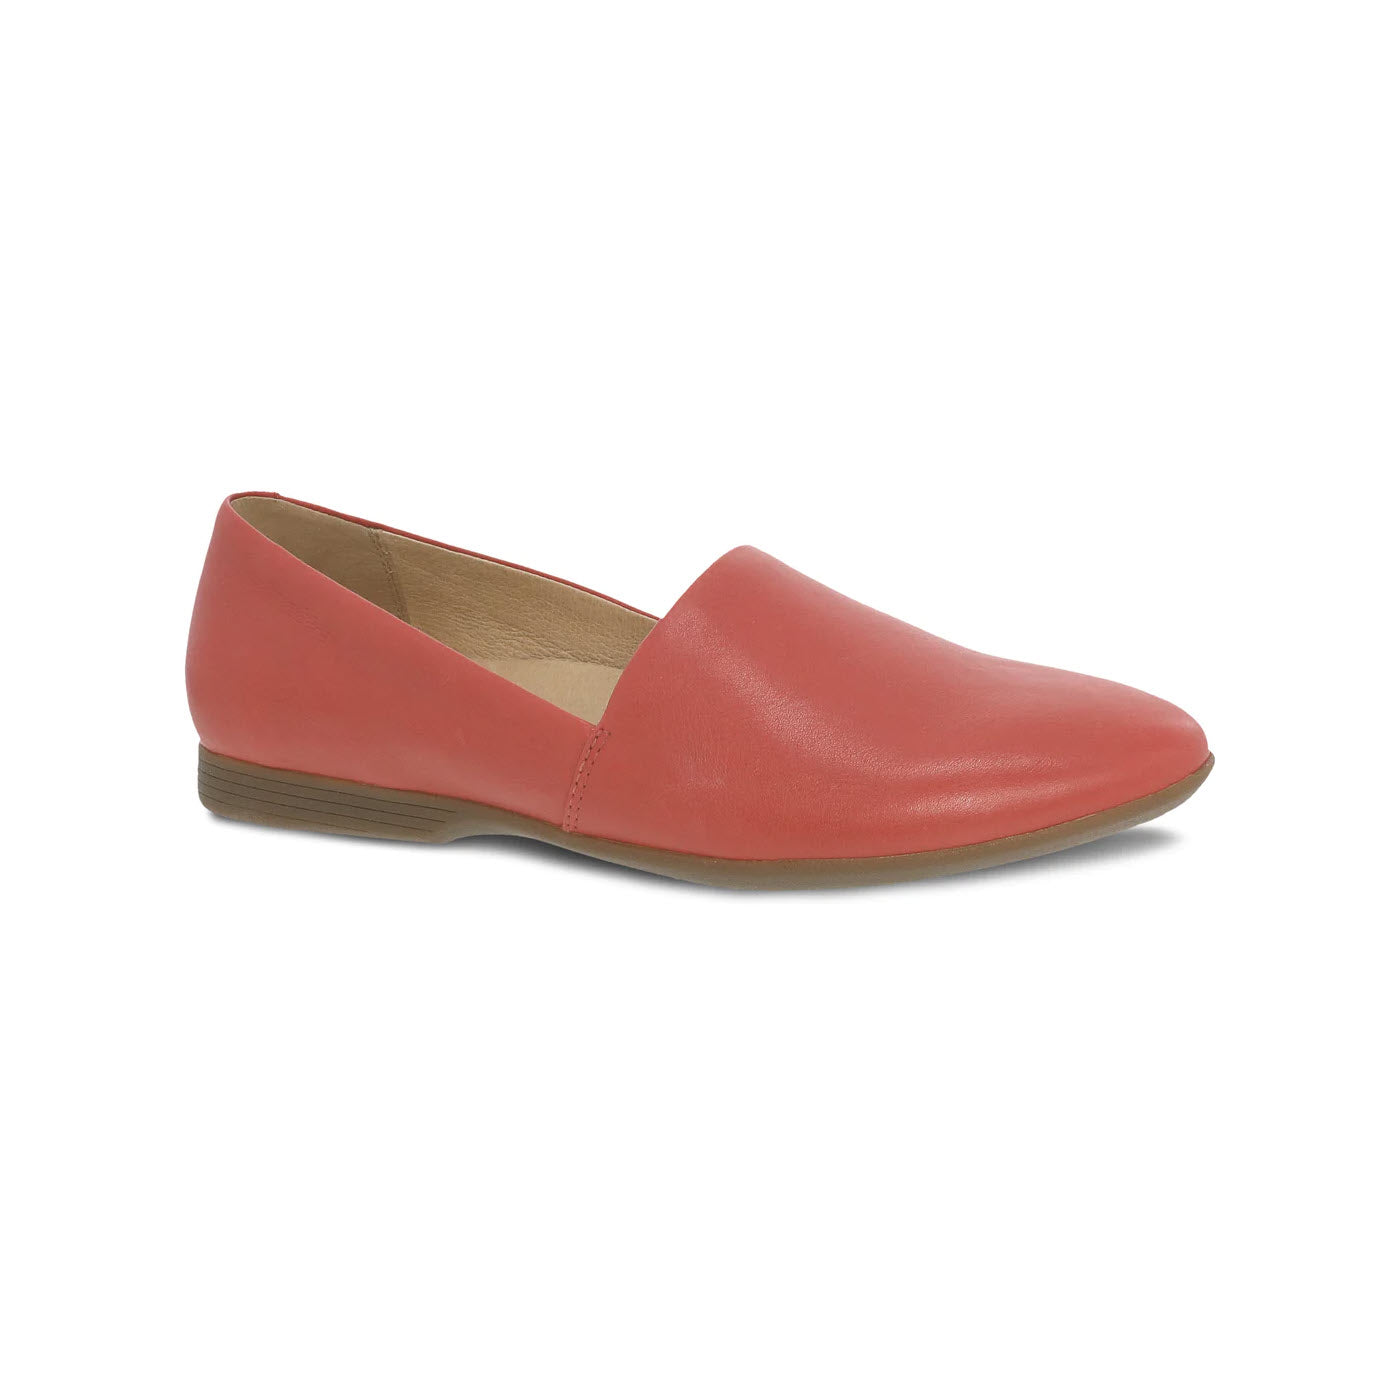 Dansko Larisa Poppy red leather slip-on flat shoe with arch support on a white background.